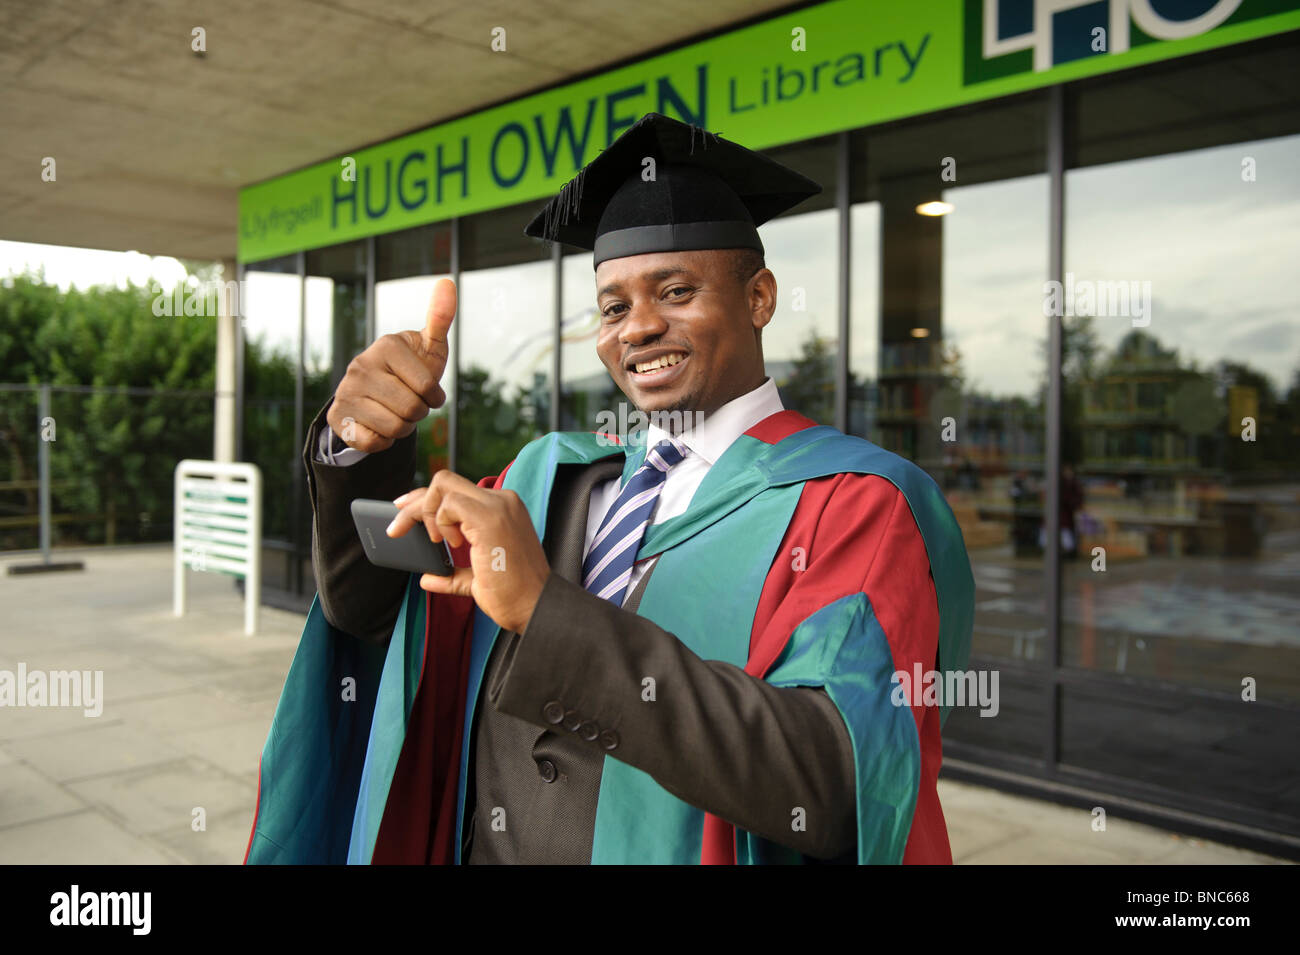 Student wearing Doctoral gown after receiving his degree  at Aberystwyth University Graduation day, Wales UK Stock Photo